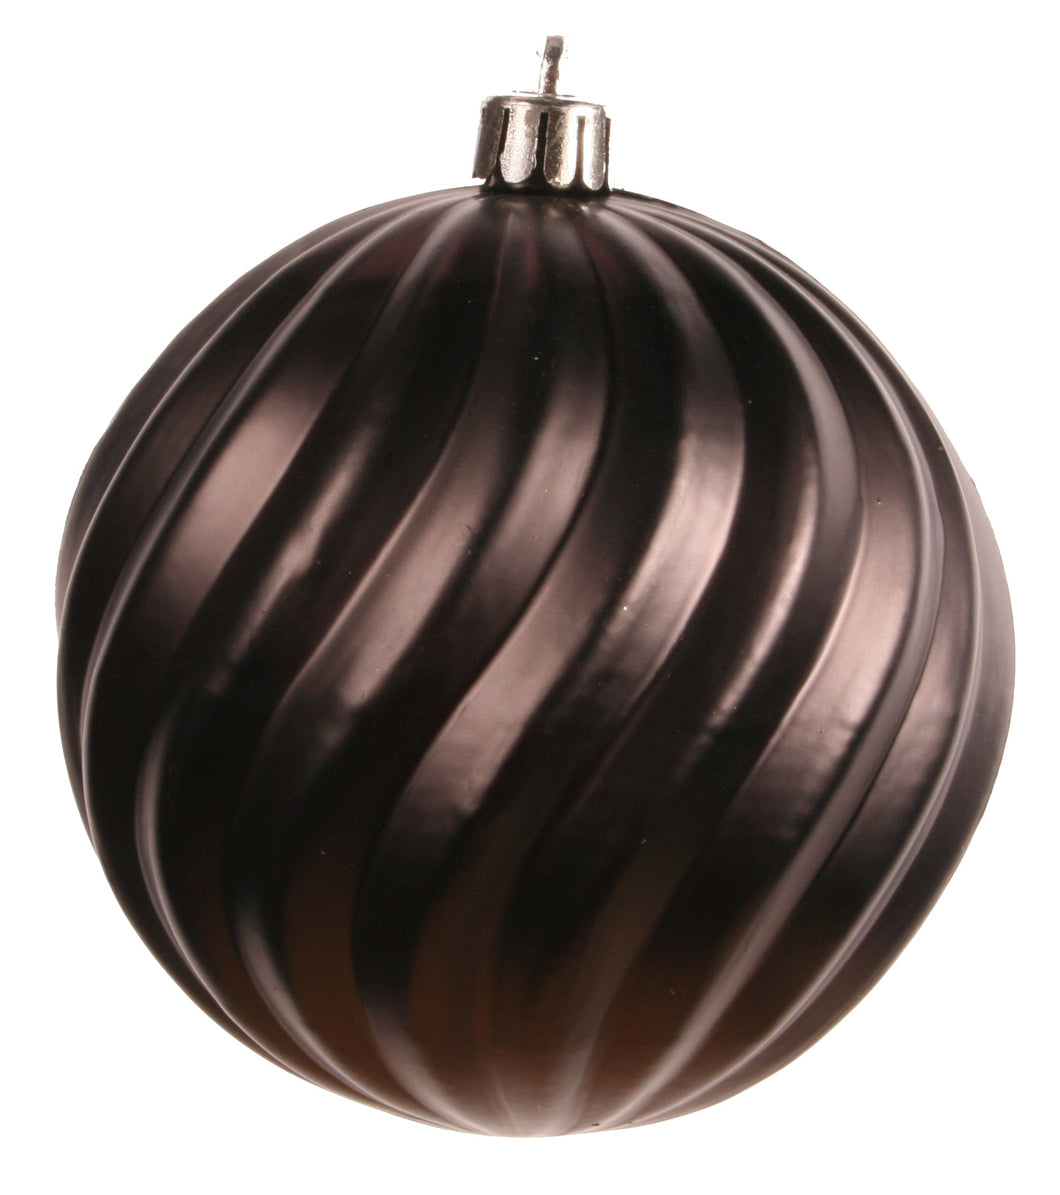 SINGLE ORNAMENT: 80 mm Round Matte Ball Ornament: Black 3 Inch Wide Silver Loop Hanger Attached